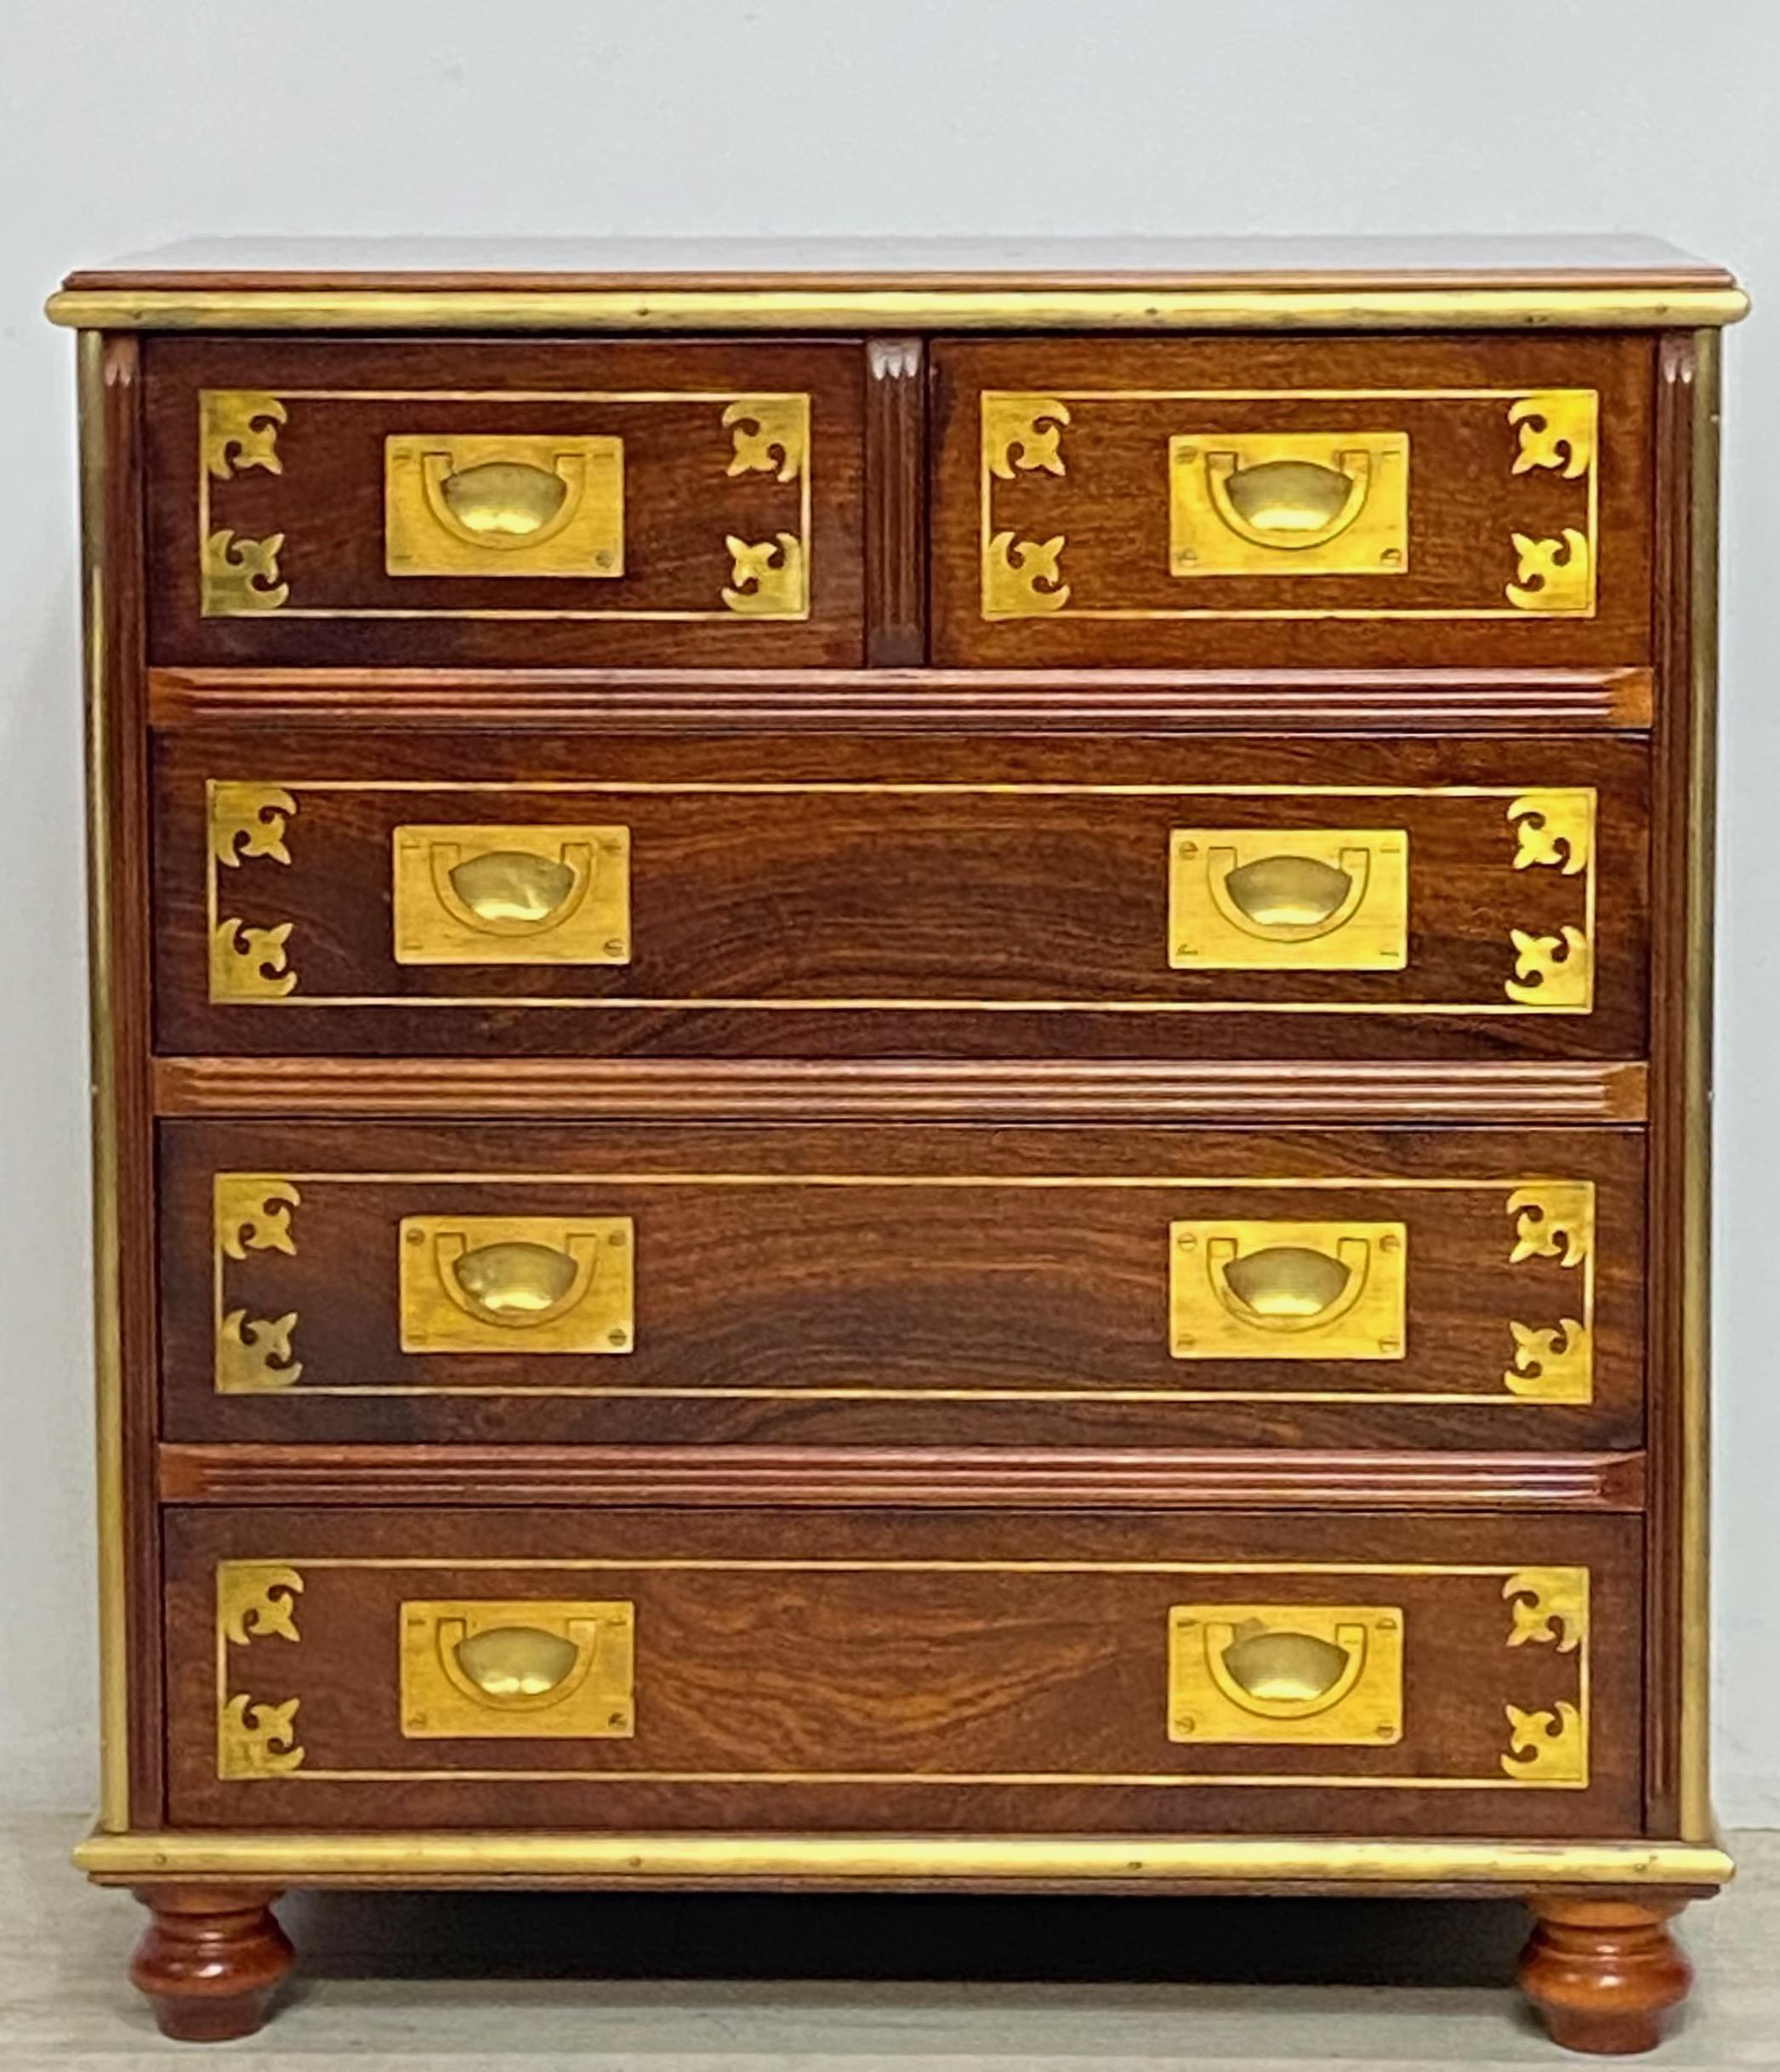 A solid mahogany small chest of drawers with inlaid brass and having inset solid brass hardware and edges. Inset small brass plaque on top reads 'The Clermont'
Part of the 